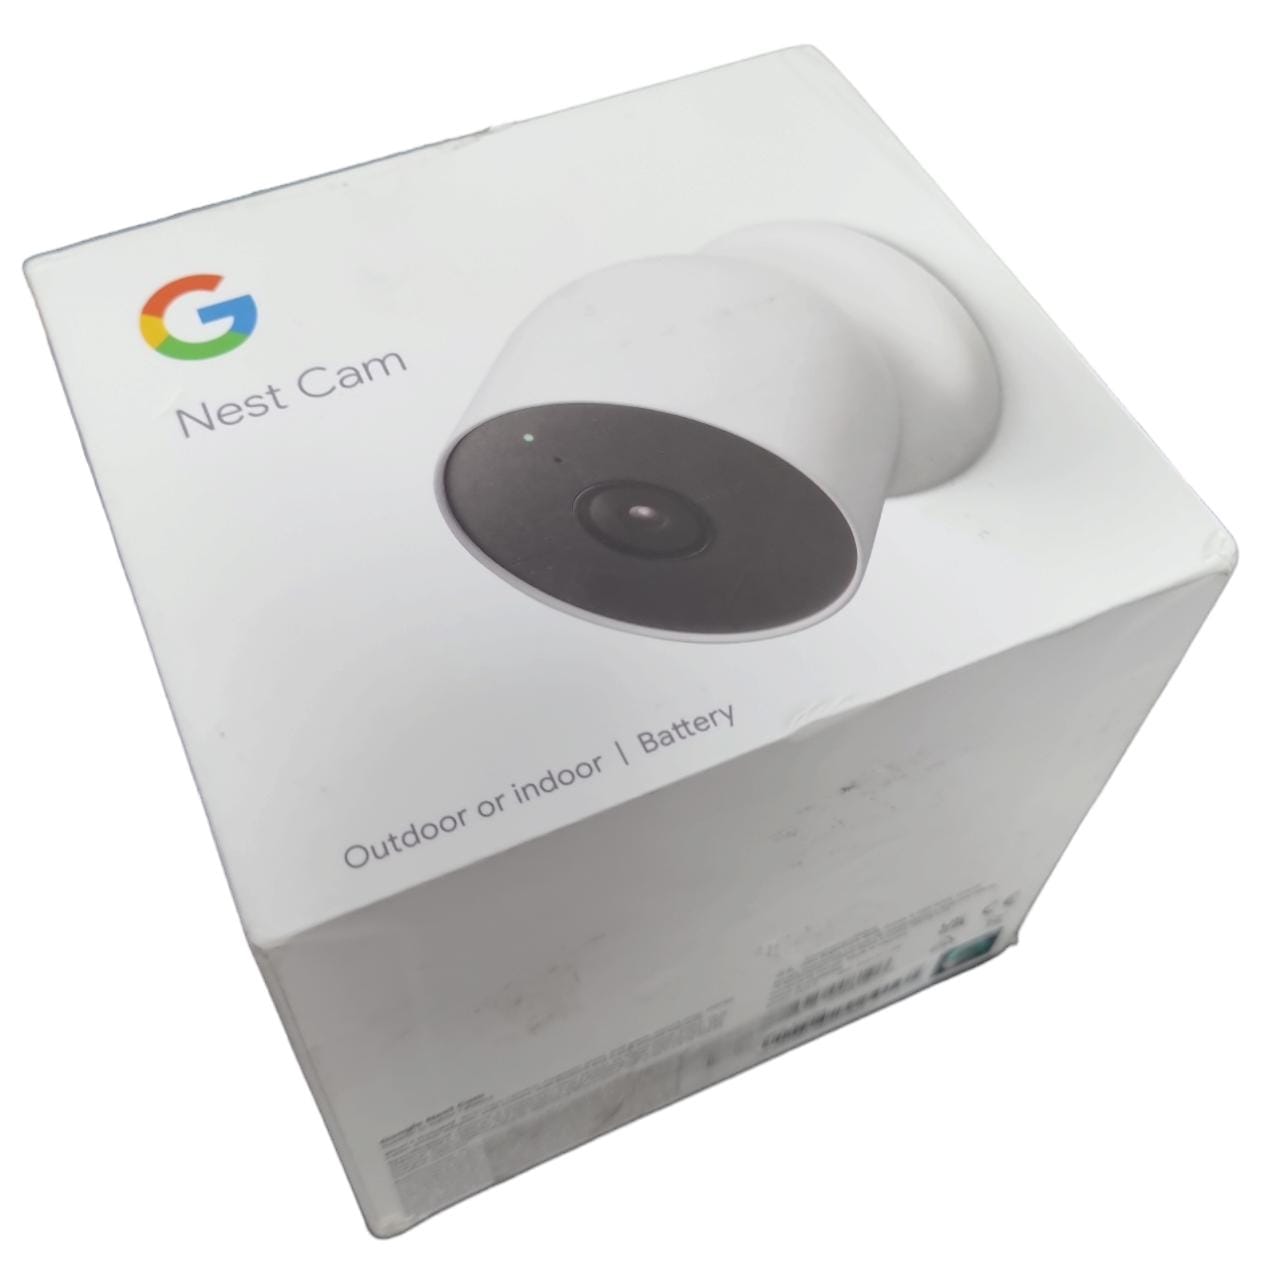 Google Nest Cam Indoor or Outdoor Security Camera, Battery Powered - G3AL9 - Boxed